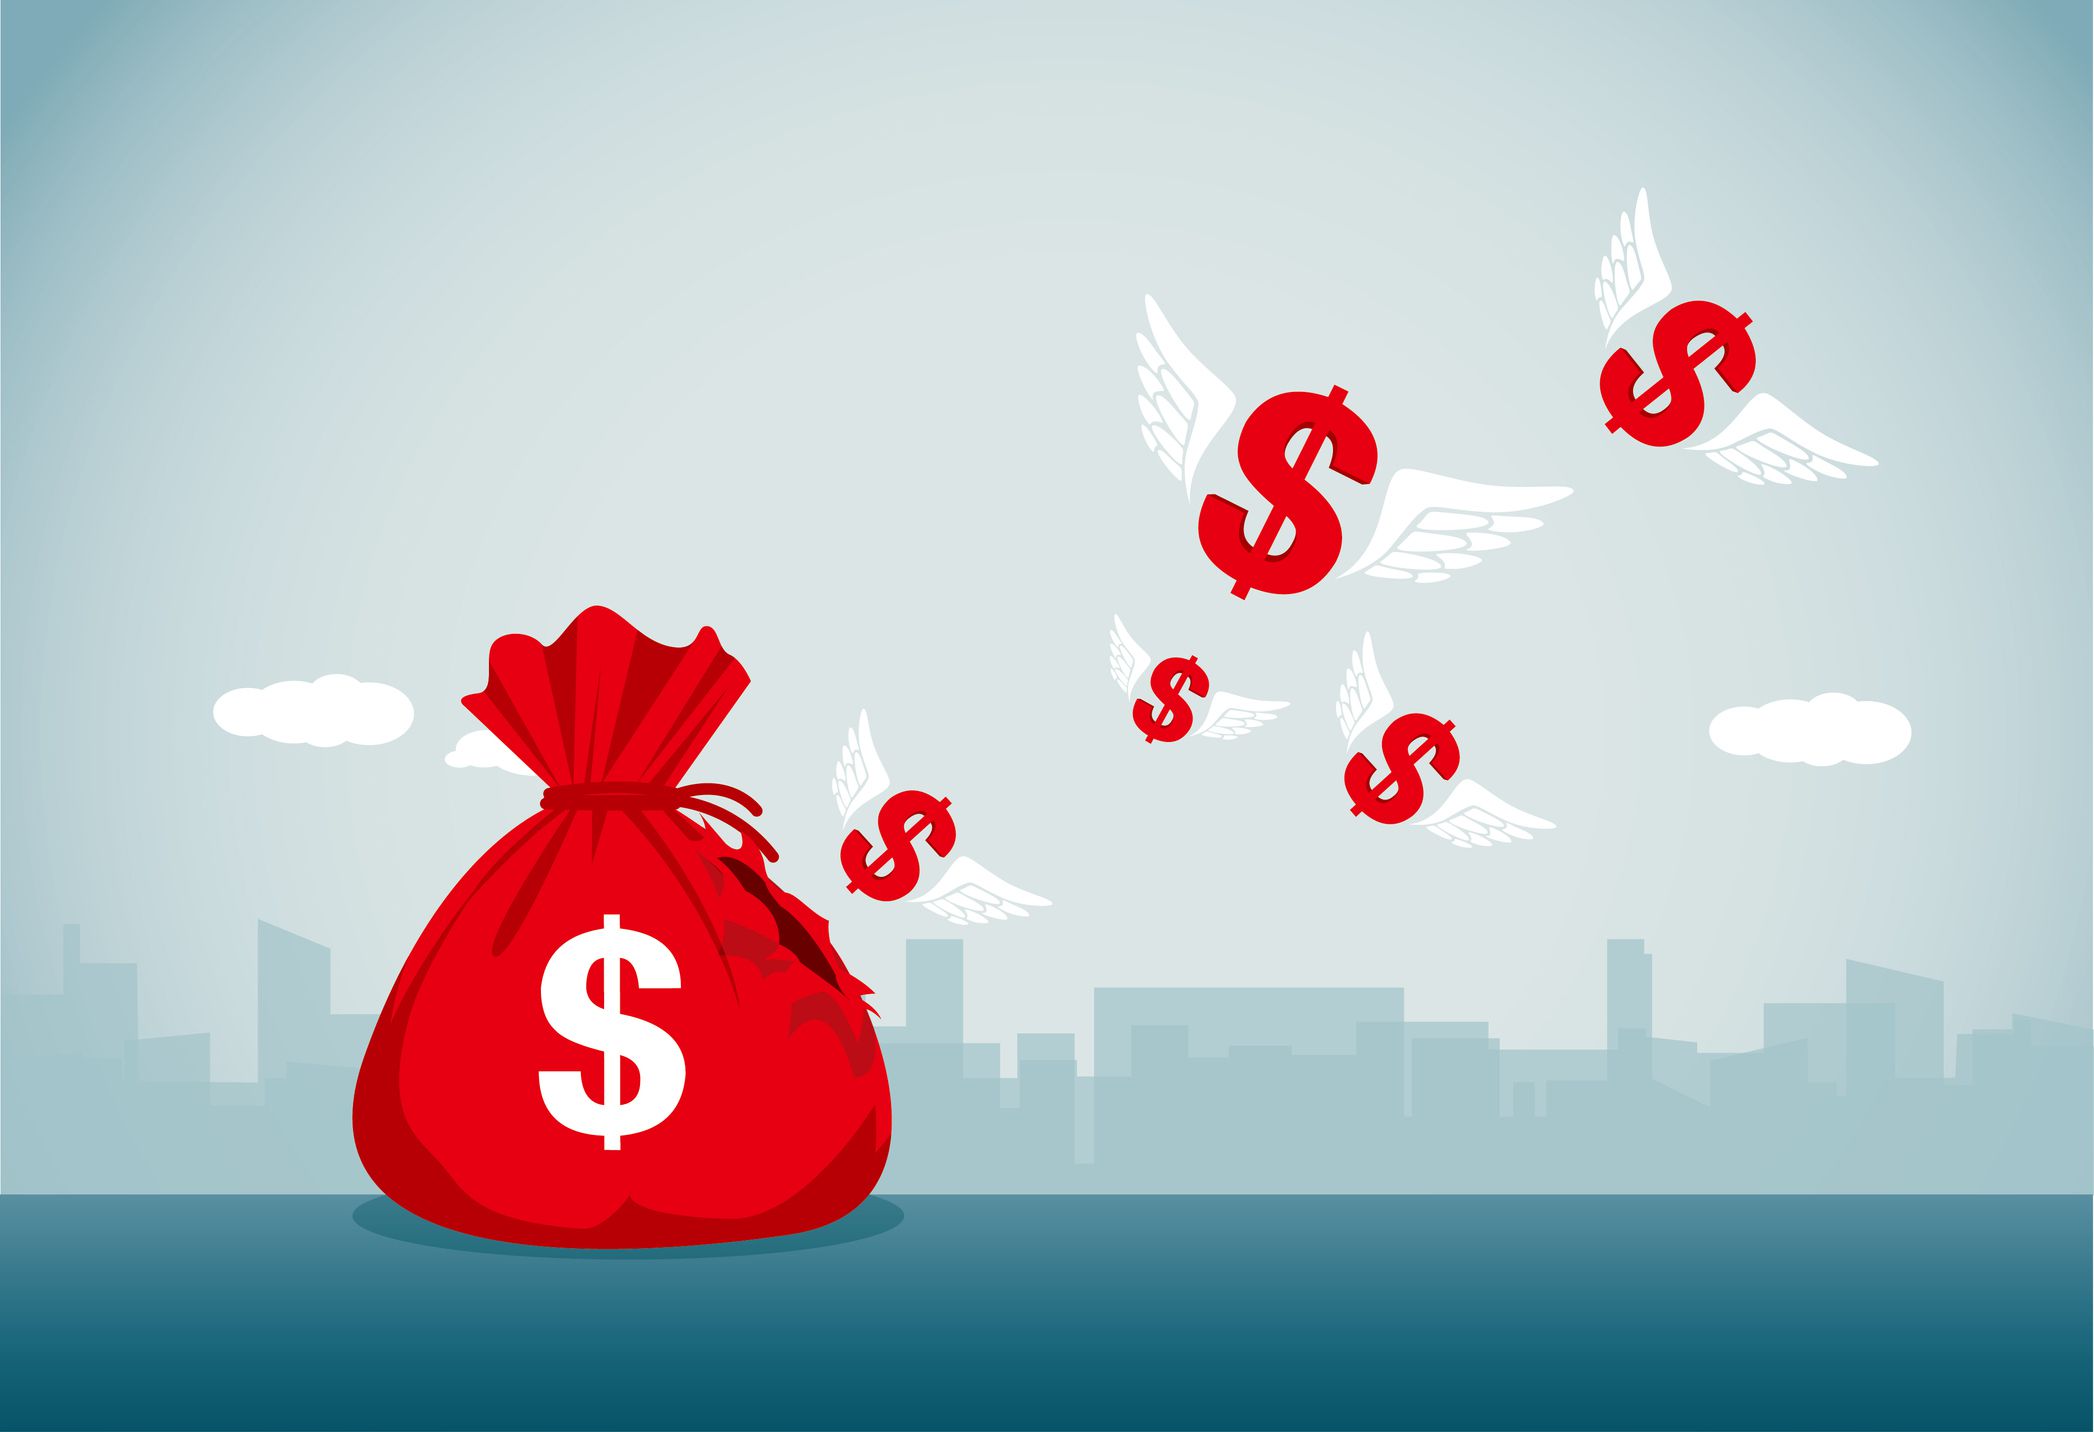 Dollars flying away from a bag of money - Investing costs concept illustration